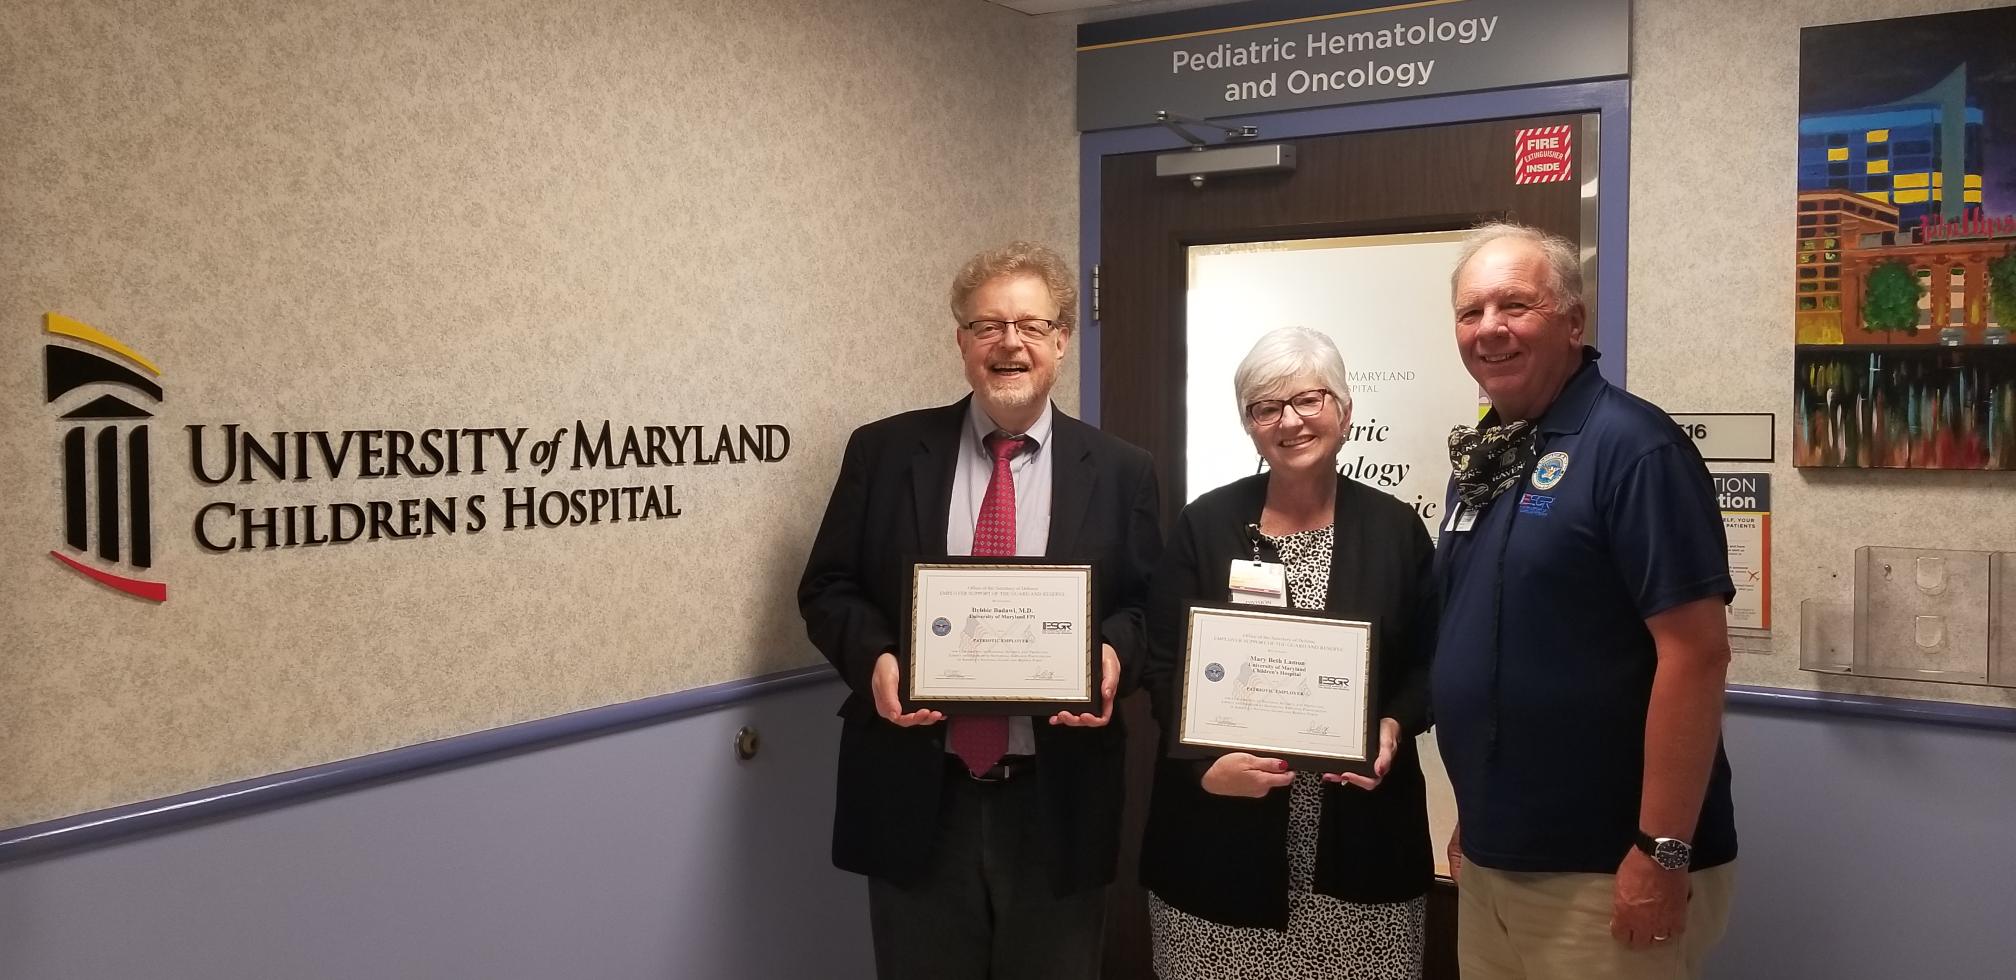 Steven J. Czinn and Mary Beth Lamon hold up Patriot awards received from Michael Comeau